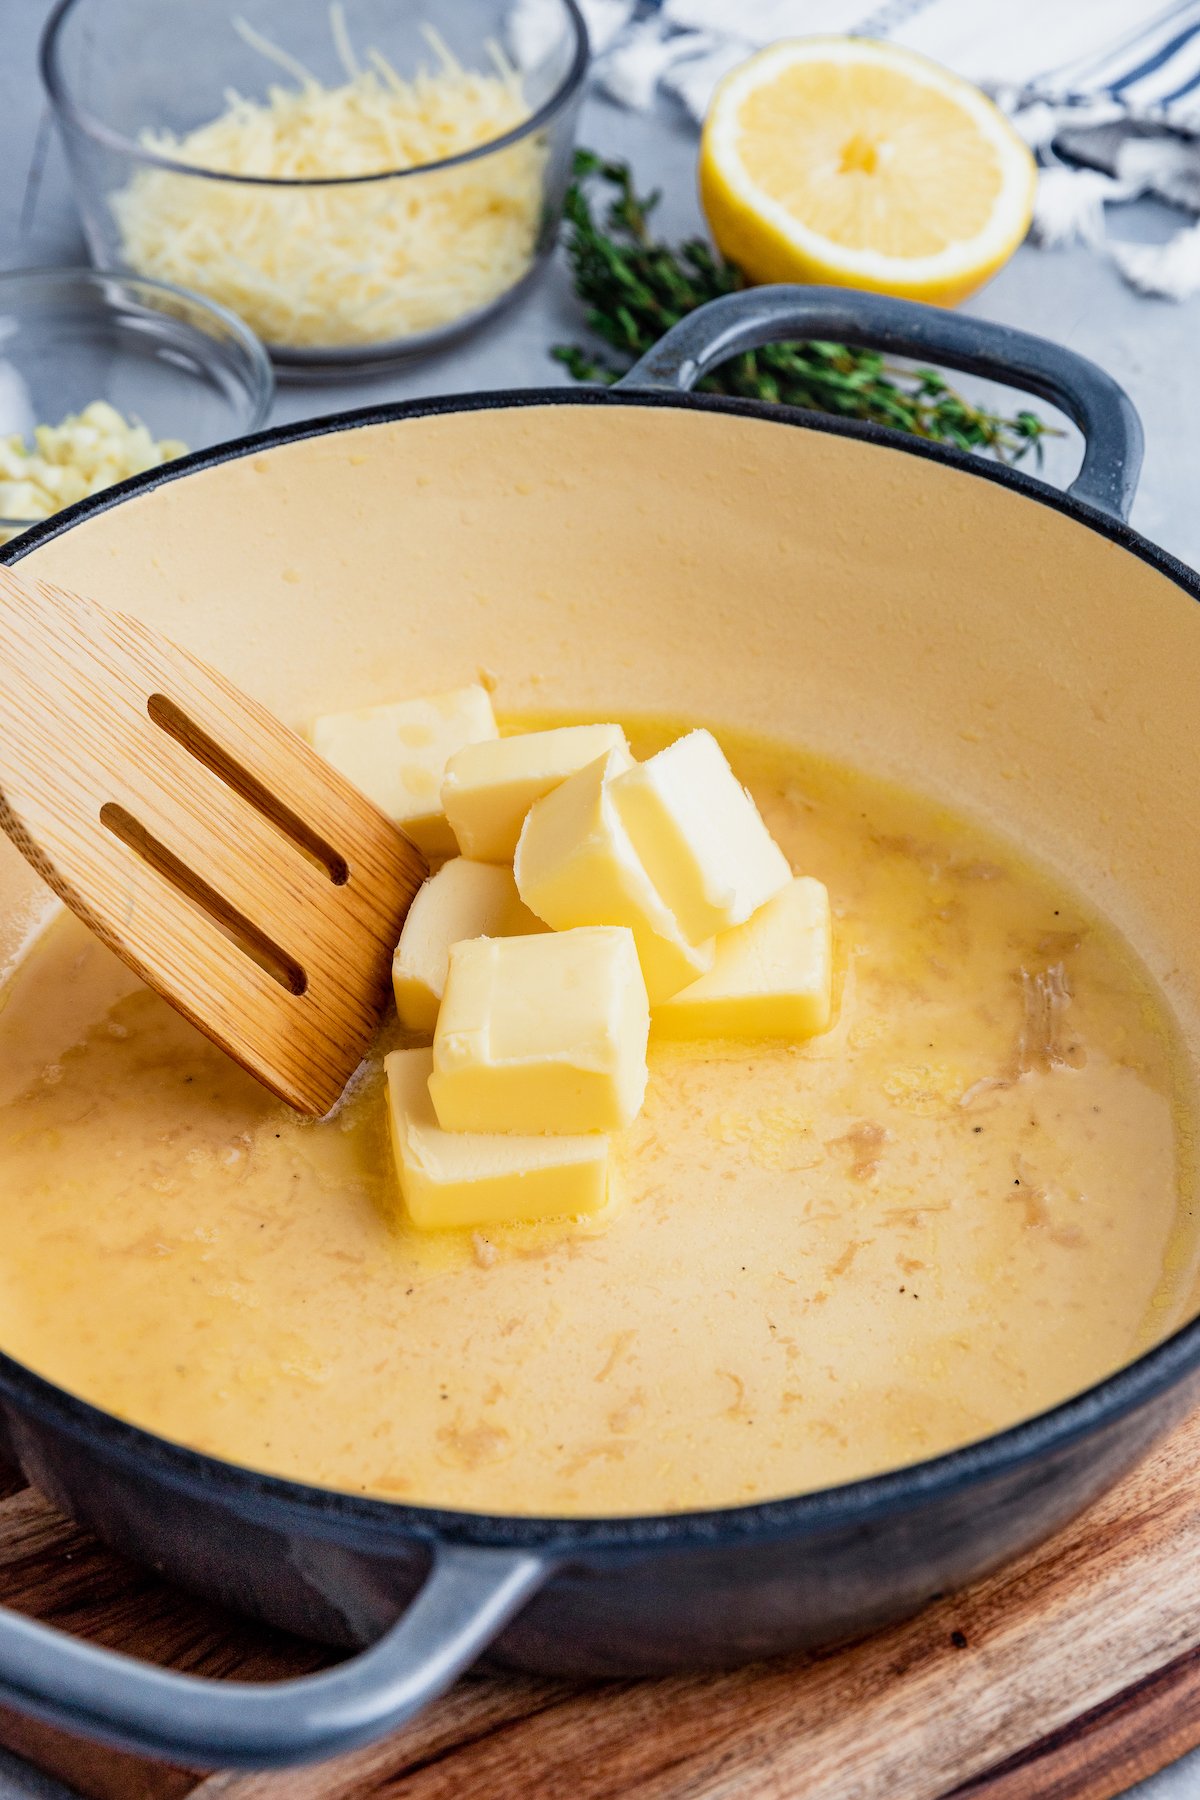 Butter melts in a skillet, stirred with a wooden spatula.